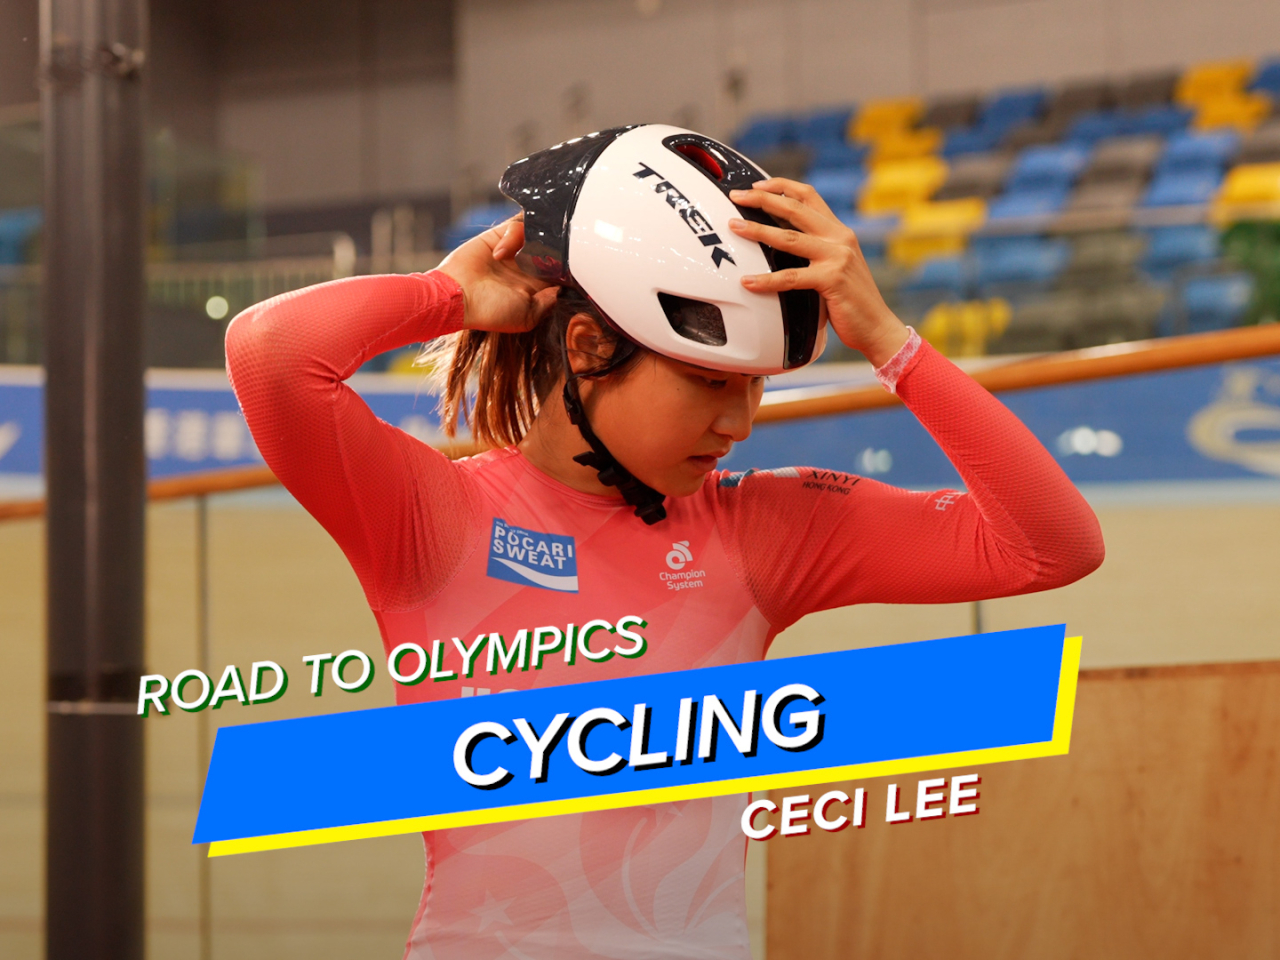 Rising HK cyclist Ceci Lee to make Olympic debut